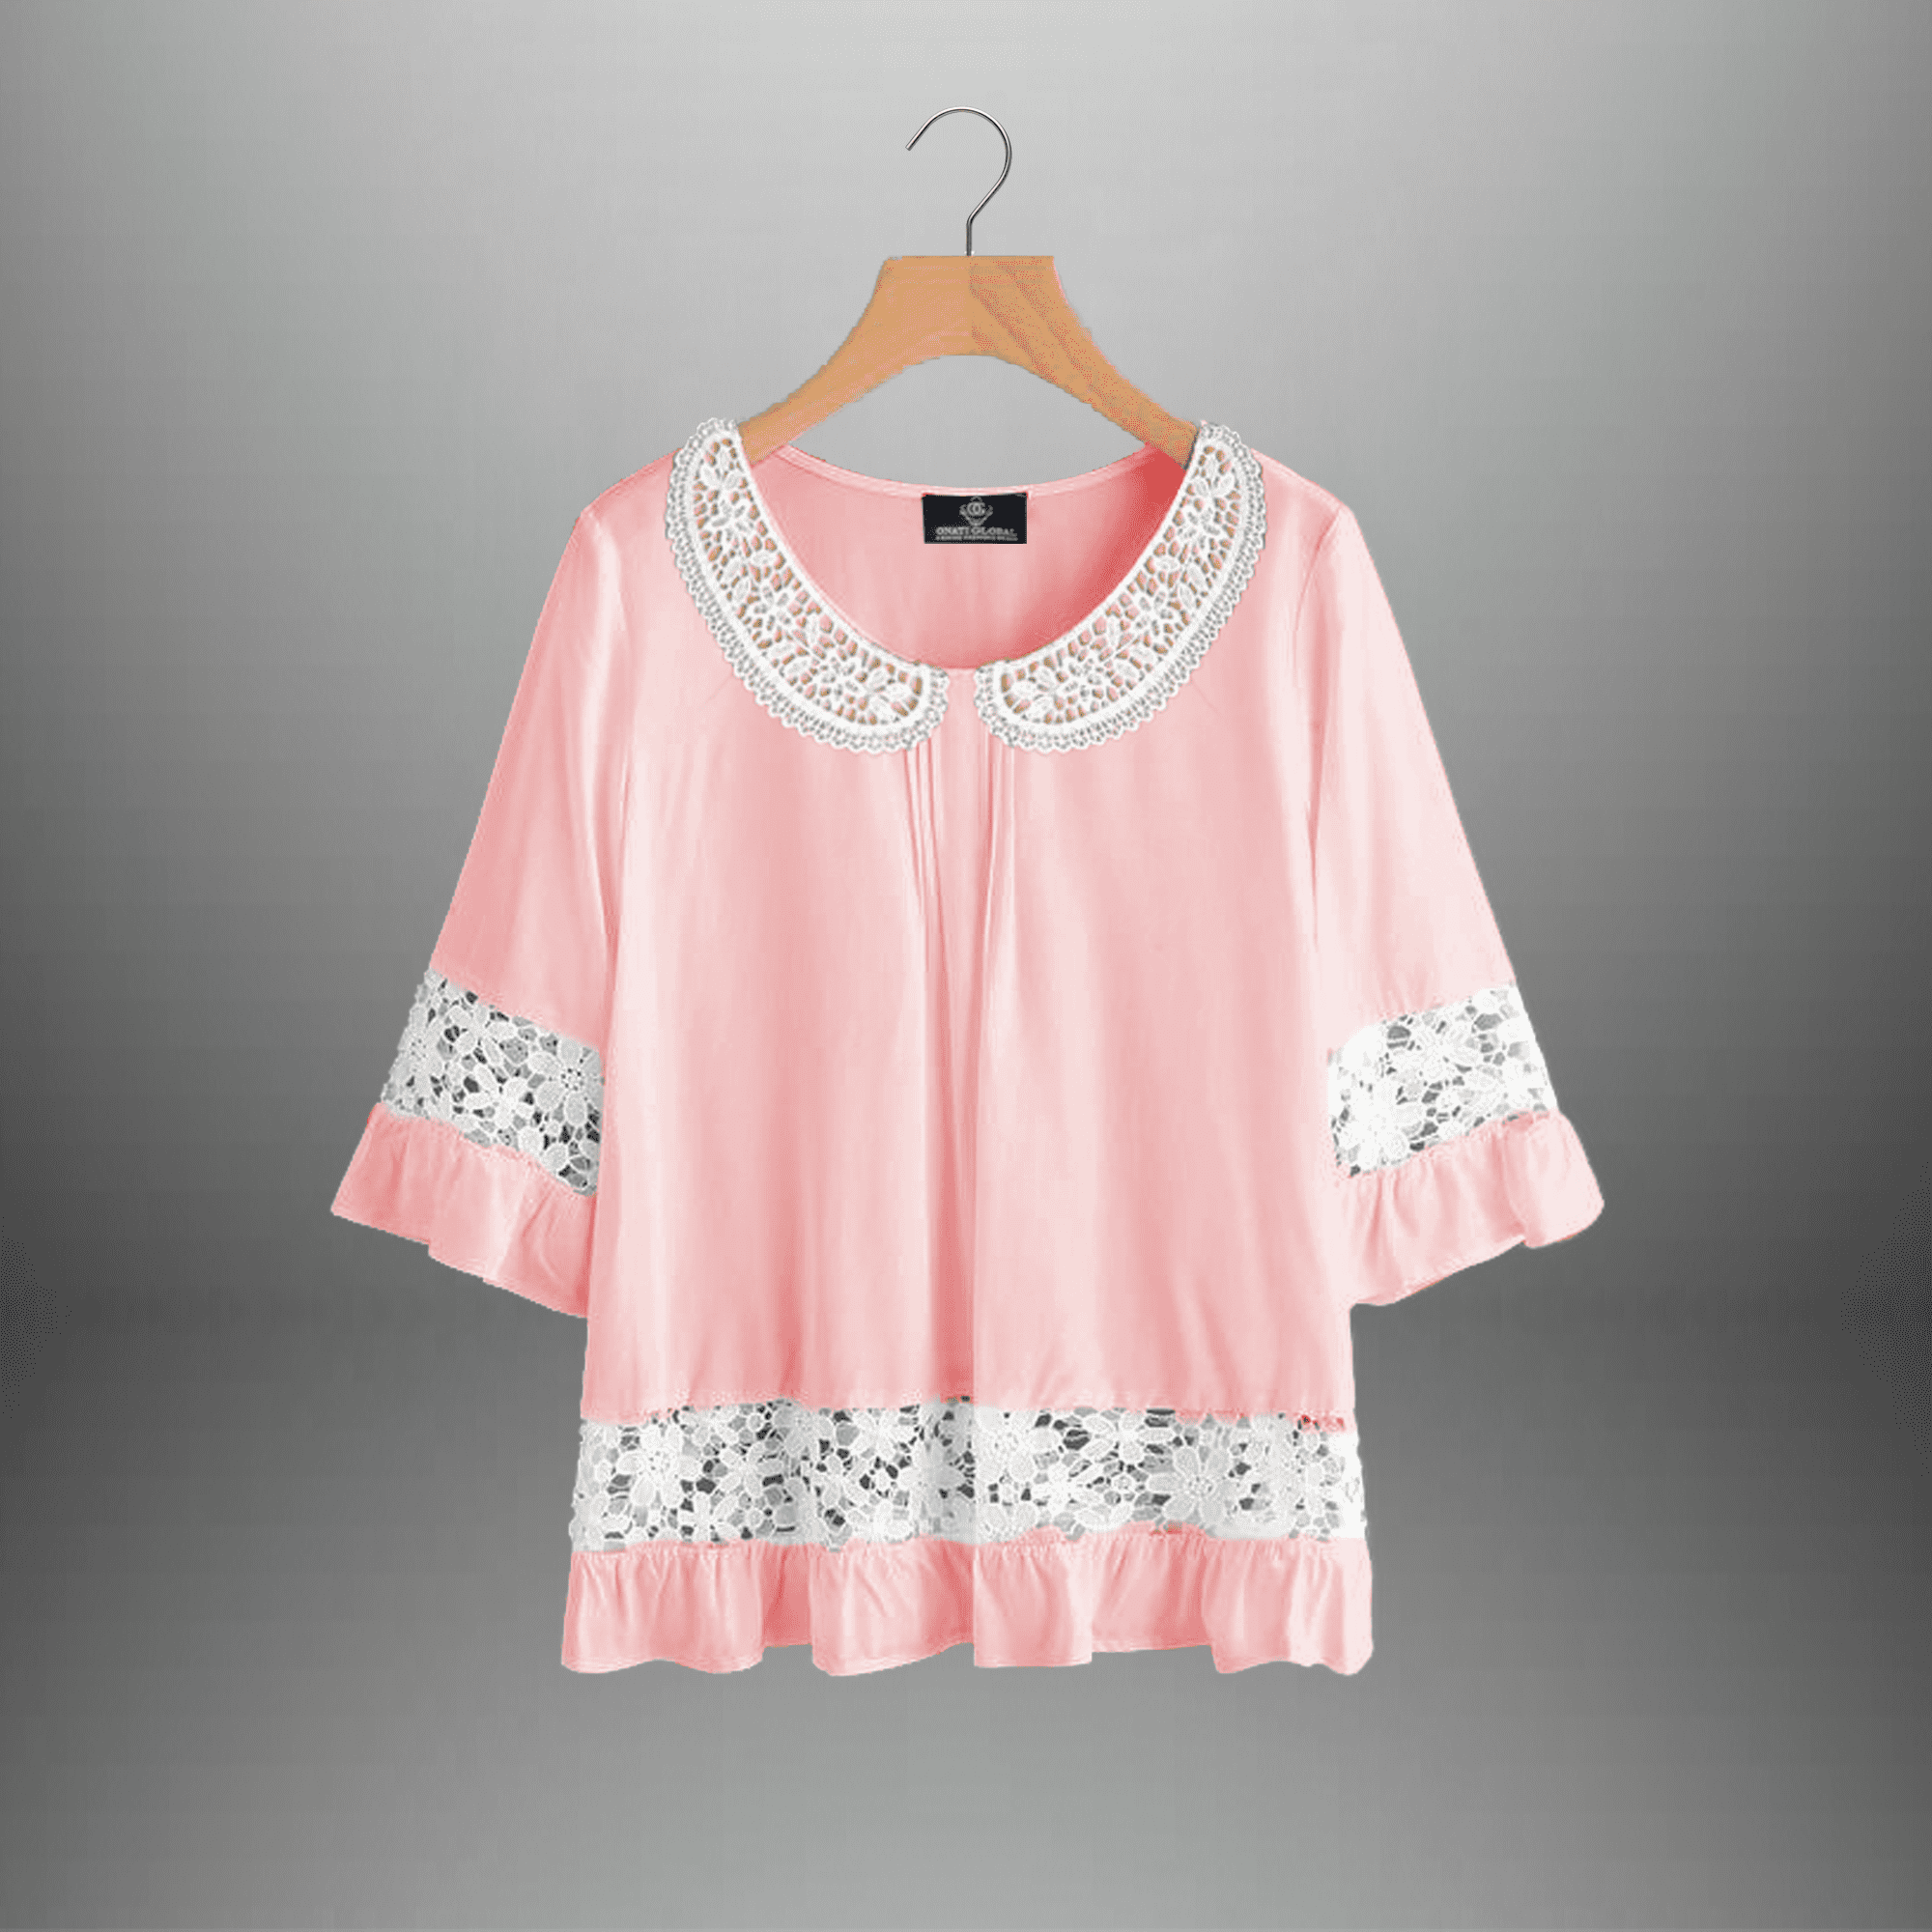 Women's Baby Pink Top with White Lace Embellishment-RET102